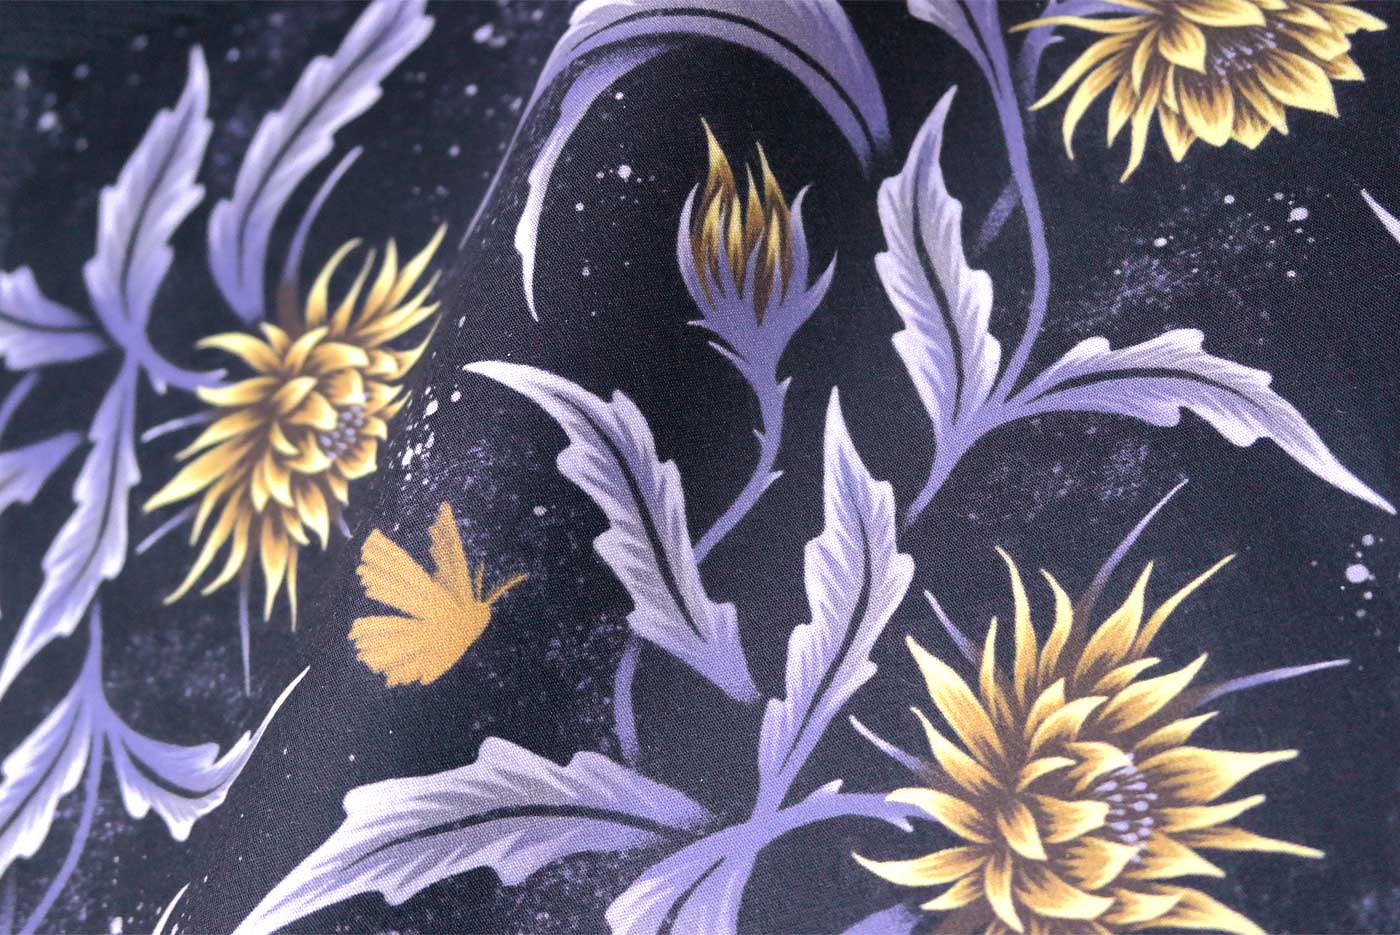 Queen of the Night floral fabric by Andrea Muller